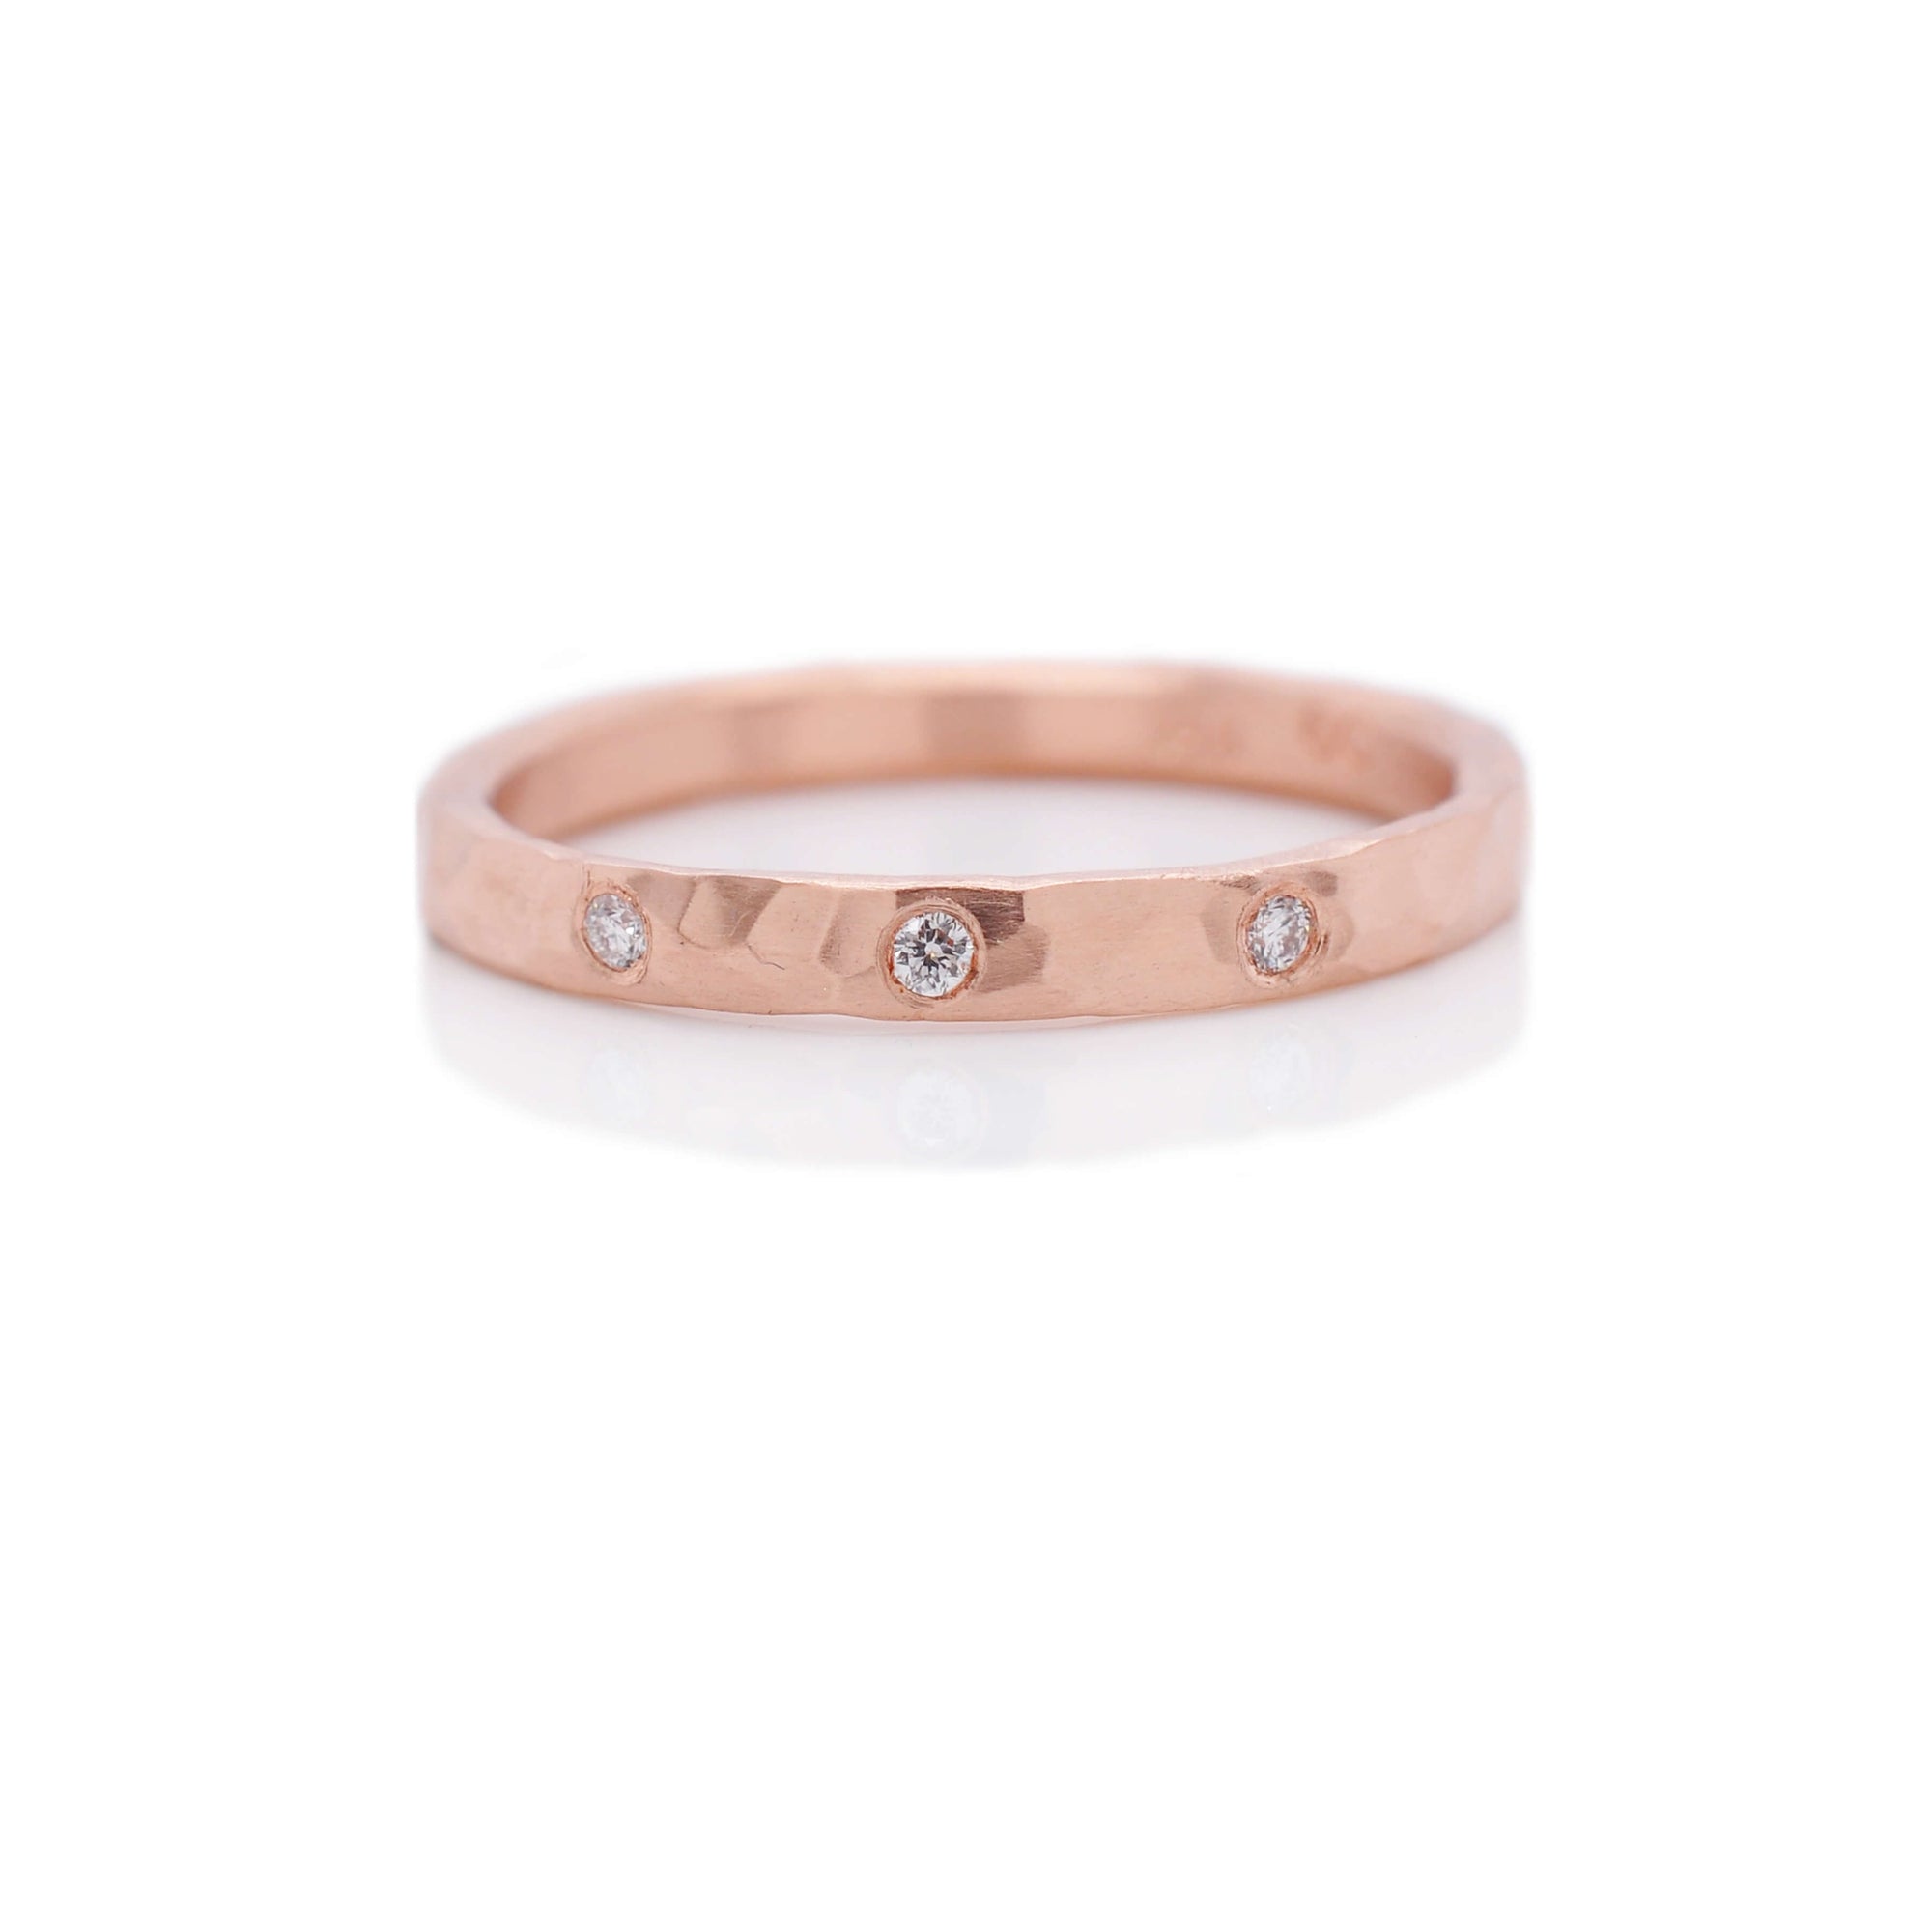 Hammered rose gold half eternity band with 3 flush set white diamonds. Handmade by EC Design Jewelry in Minneapolis, MN.